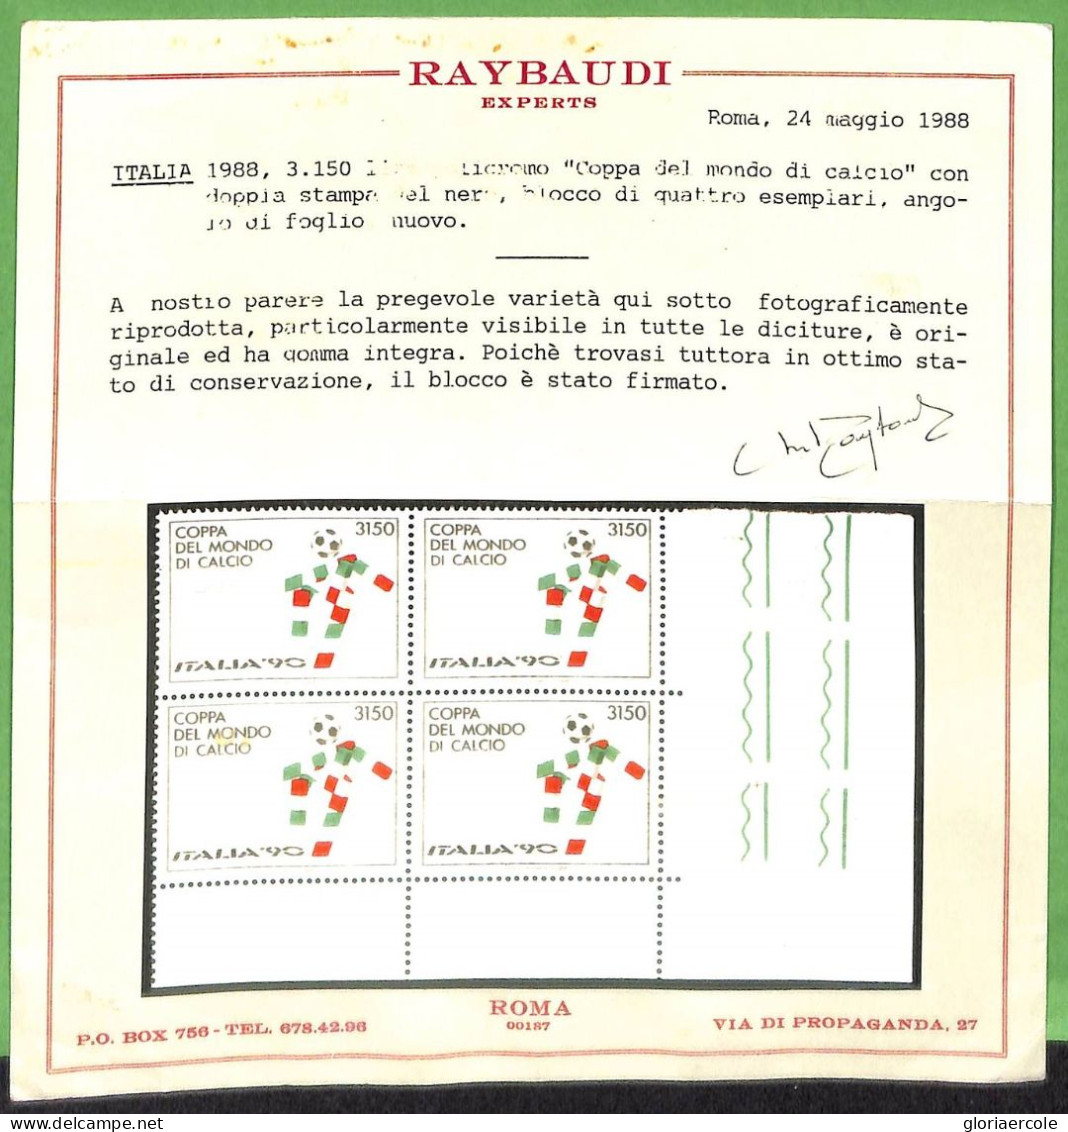 A1199 - ITALY - STAMPS - FOOTBALL  1990 Block Of 4 DOUBLE PRINT ERROR - Raybaudi - Ungebraucht